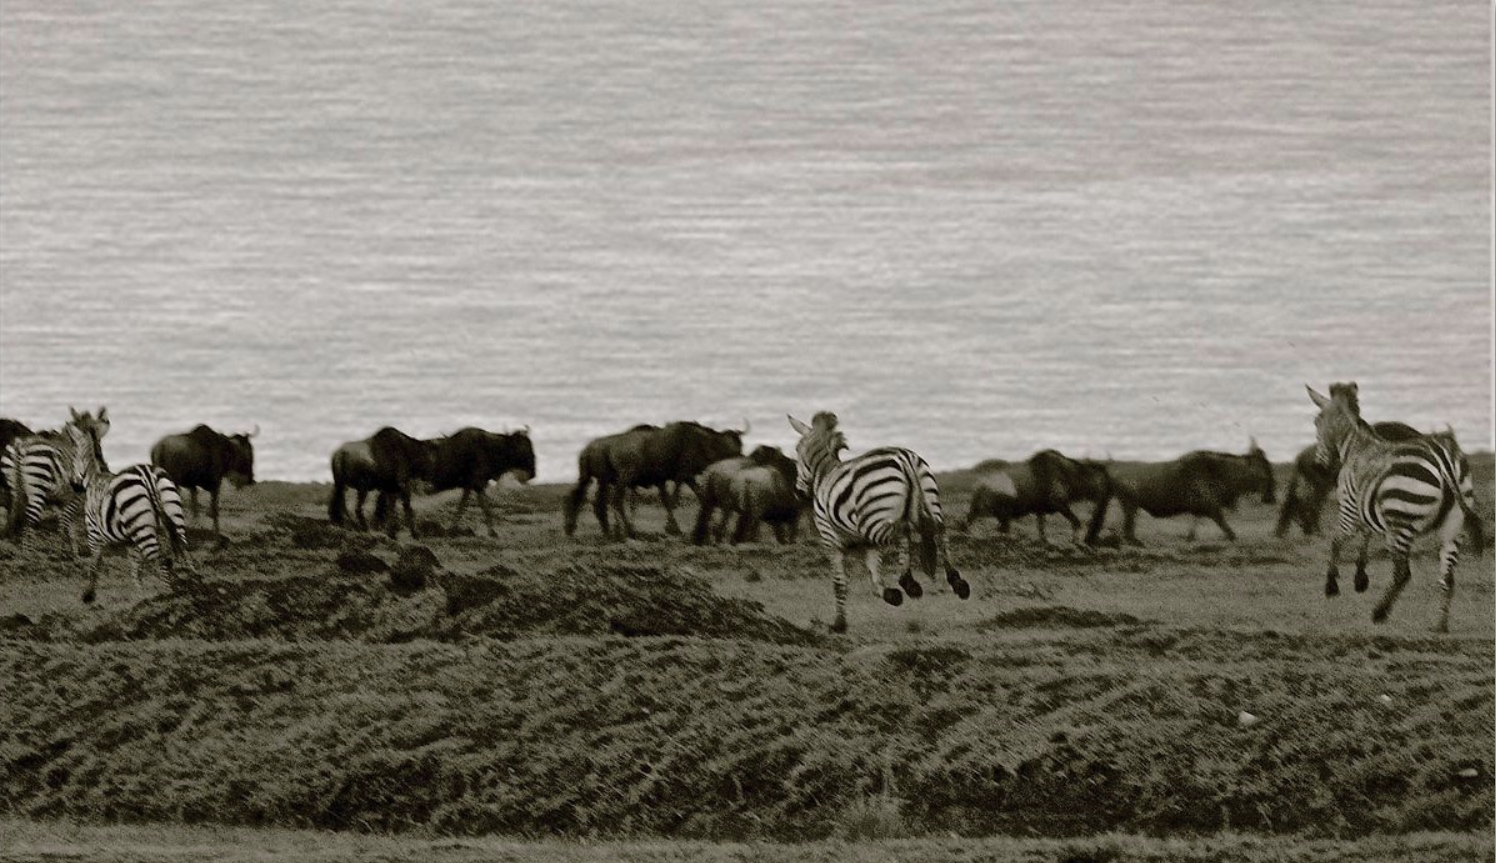 A zebra running across the grass with other animals in the background.